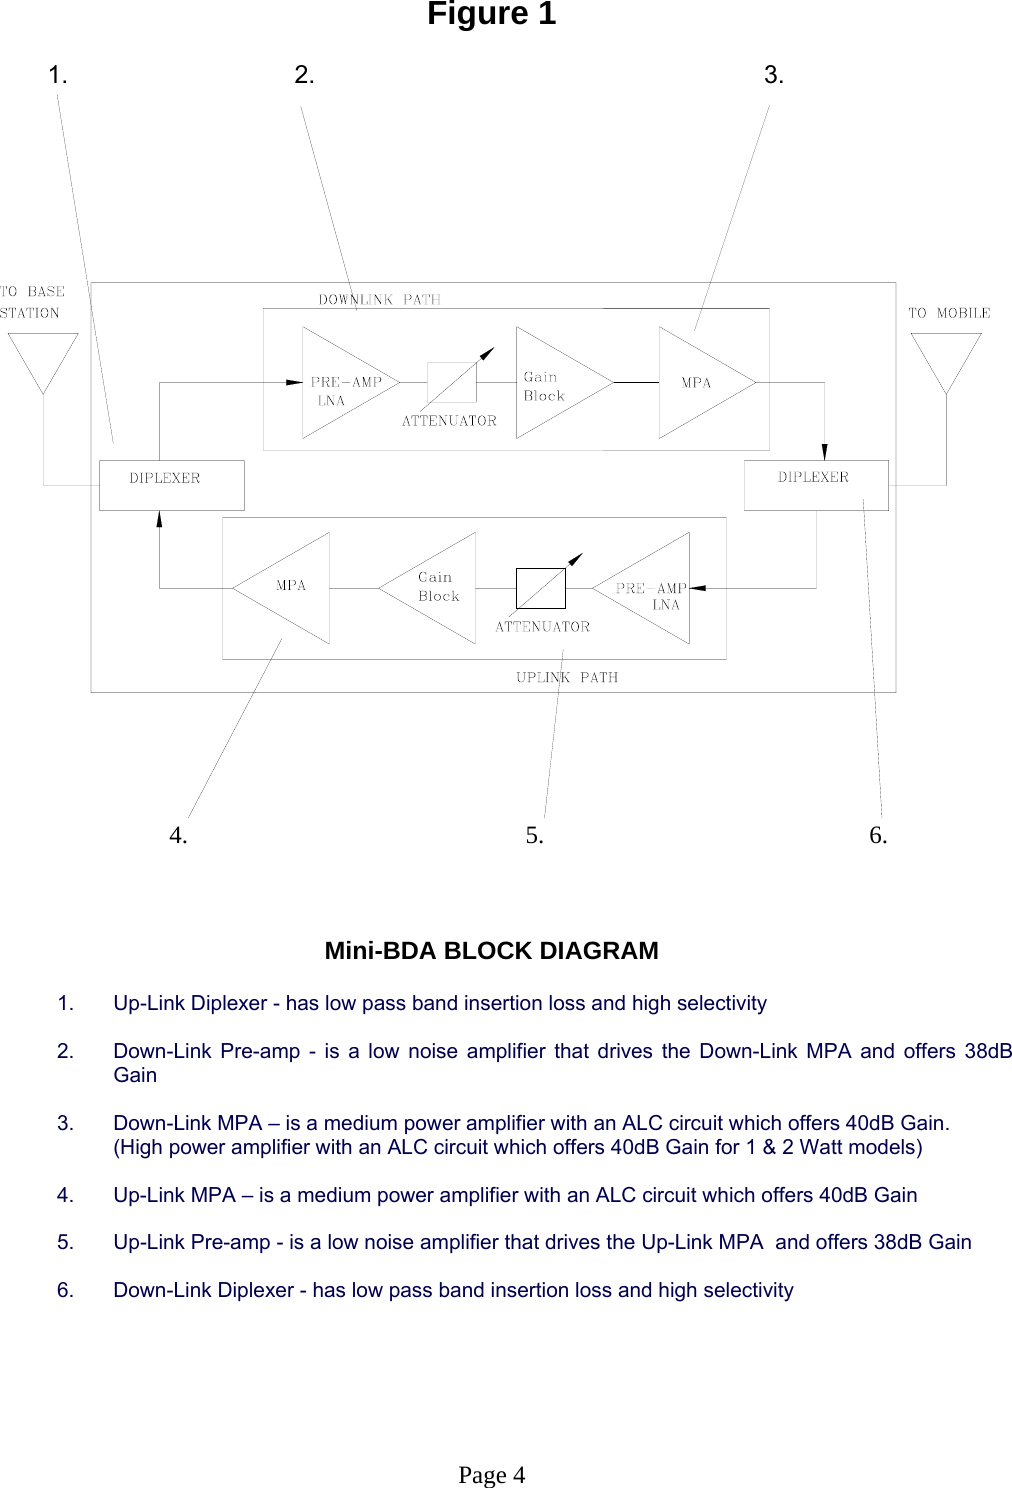 Figure 1       1.                           2.                     3.                                                                               4.                              5.                                6.    Mini-BDA BLOCK DIAGRAM  1.  Up-Link Diplexer - has low pass band insertion loss and high selectivity   2.  Down-Link Pre-amp - is a low noise amplifier that drives the Down-Link MPA and offers 38dB Gain  3.  Down-Link MPA – is a medium power amplifier with an ALC circuit which offers 40dB Gain.   (High power amplifier with an ALC circuit which offers 40dB Gain for 1 &amp; 2 Watt models)  4.  Up-Link MPA – is a medium power amplifier with an ALC circuit which offers 40dB Gain  5.  Up-Link Pre-amp - is a low noise amplifier that drives the Up-Link MPA  and offers 38dB Gain  6.  Down-Link Diplexer - has low pass band insertion loss and high selectivity      Page 4 